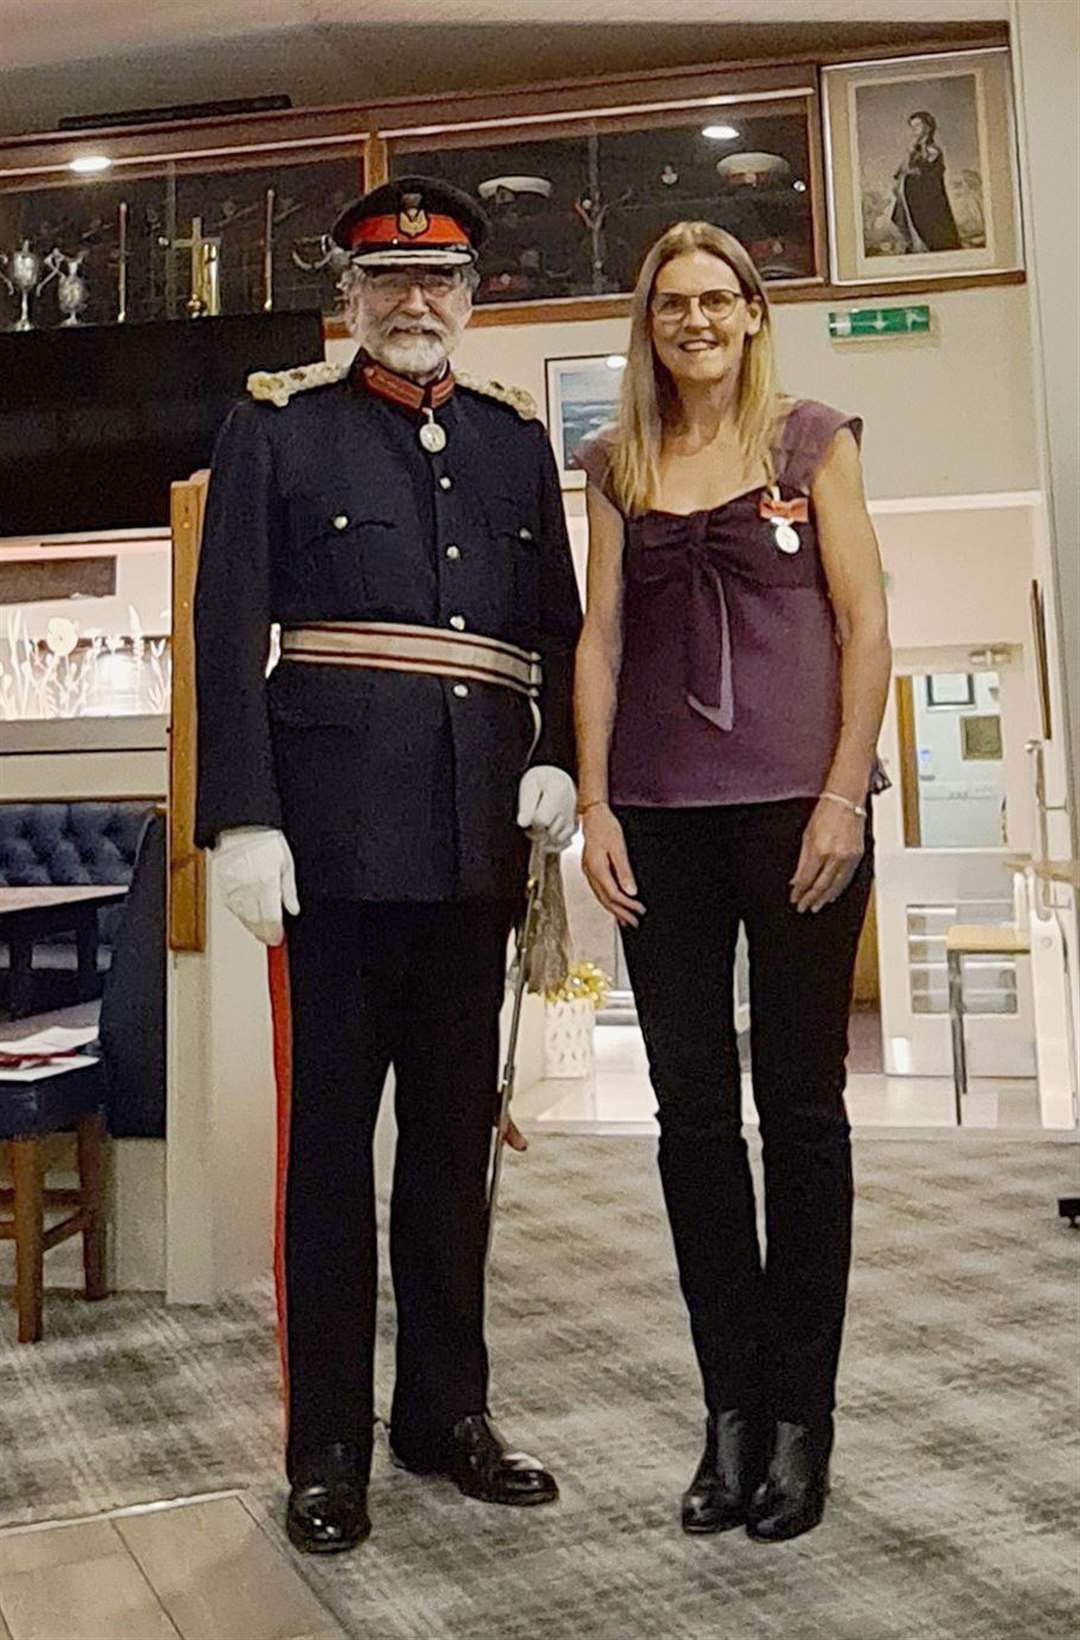 Sophie Dunnett after being presented with her British Empire Medal by Lord Thurso, the Lord-Lieutenant of Caithness.